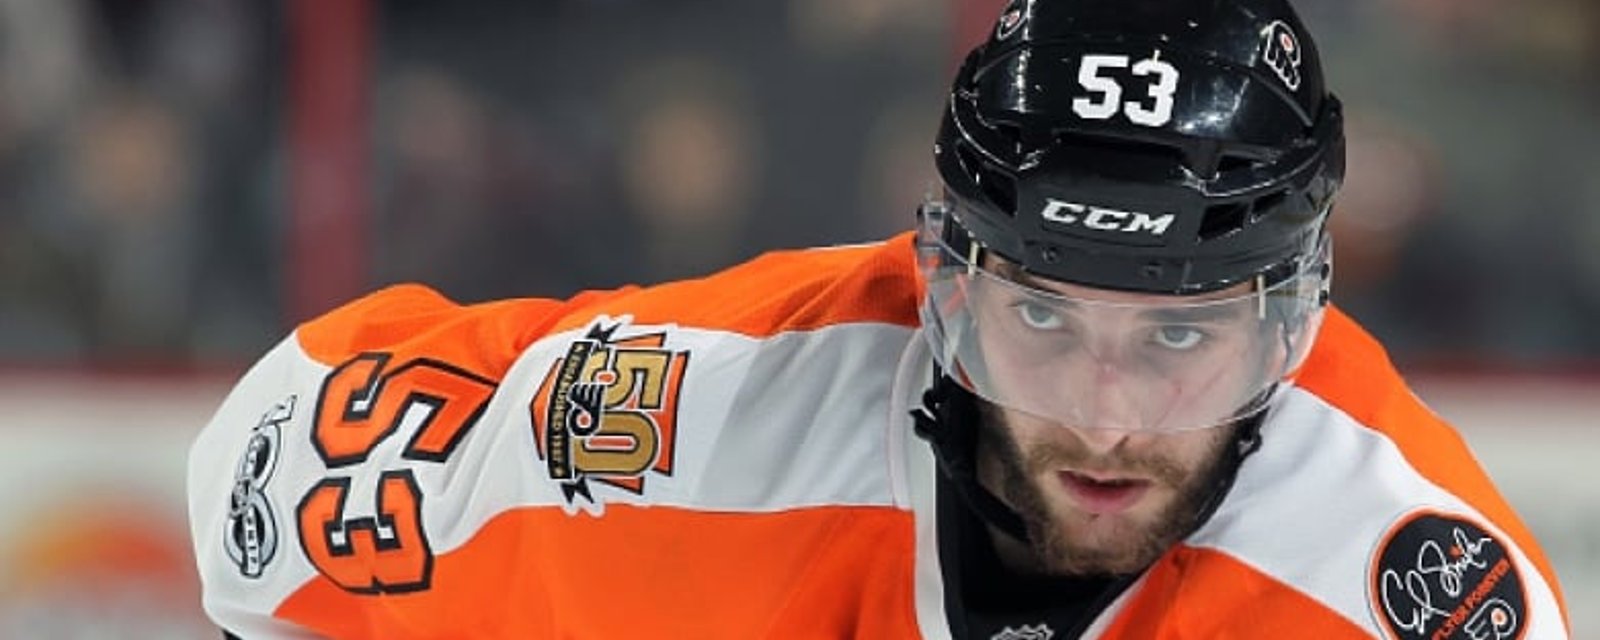 Flyers going all-in on Gostisbehere trade?! 